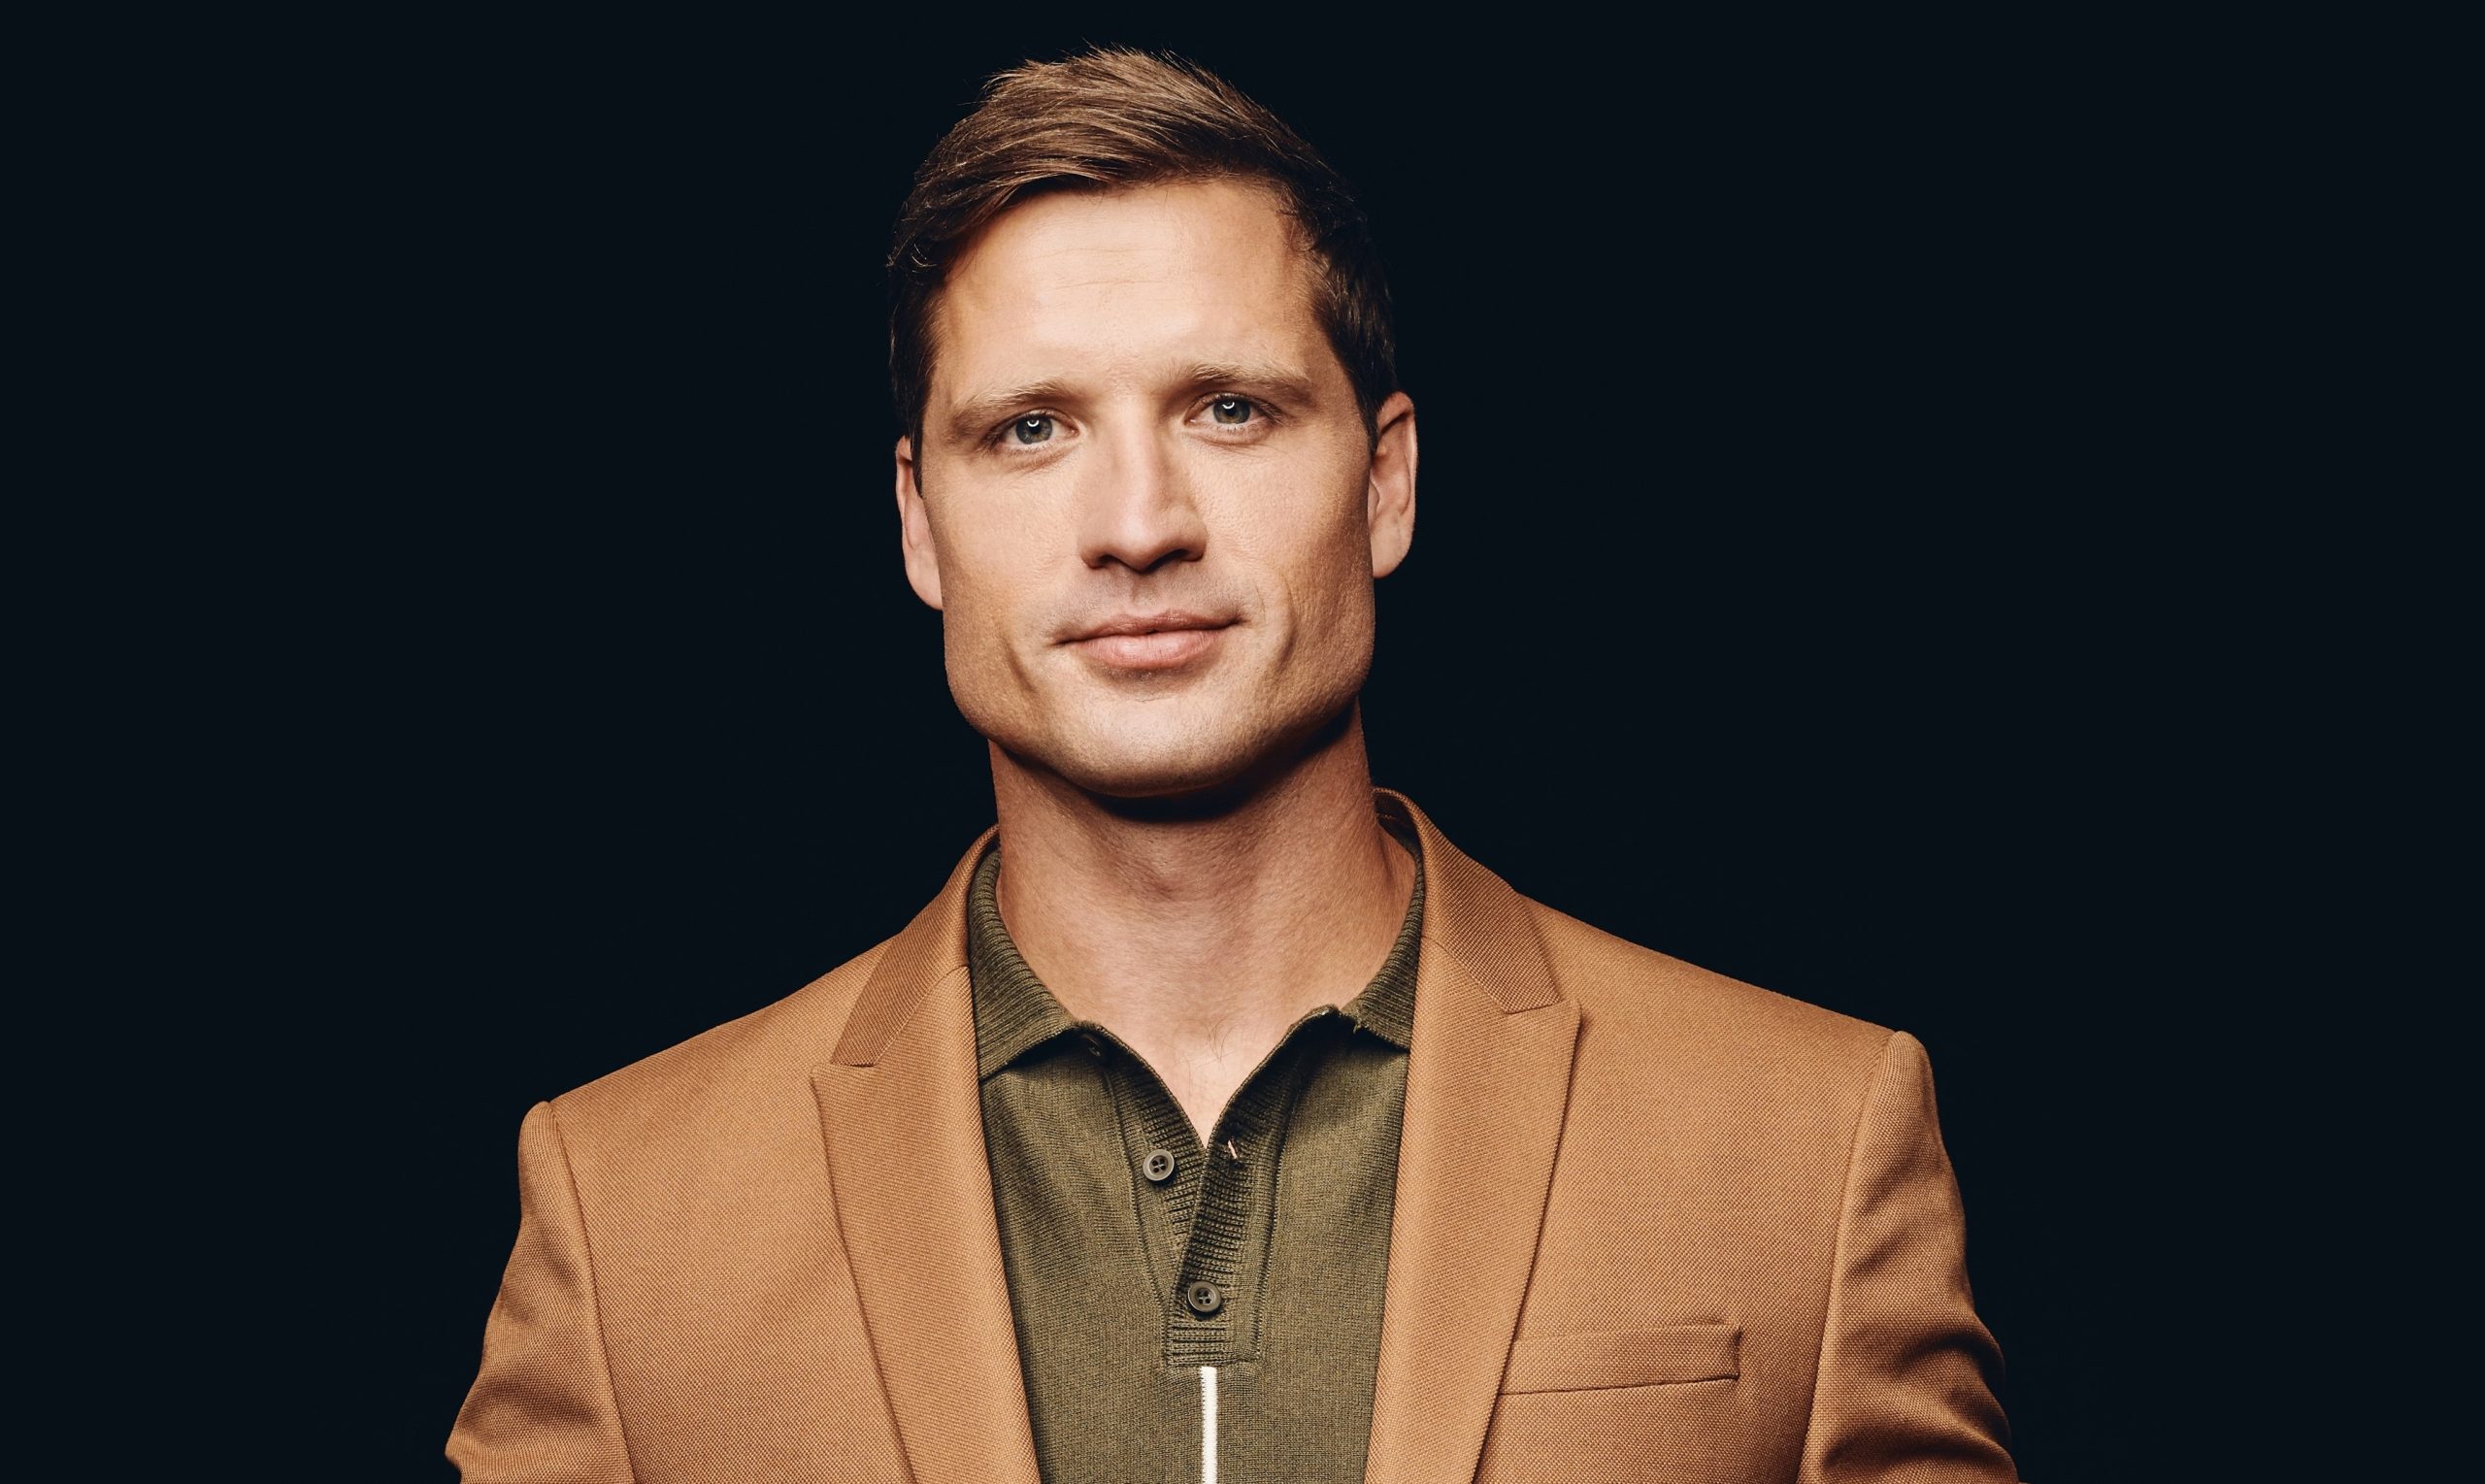 Walker Hayes Imagines a Bittersweet Future in 'Don't Let Her' Sounds